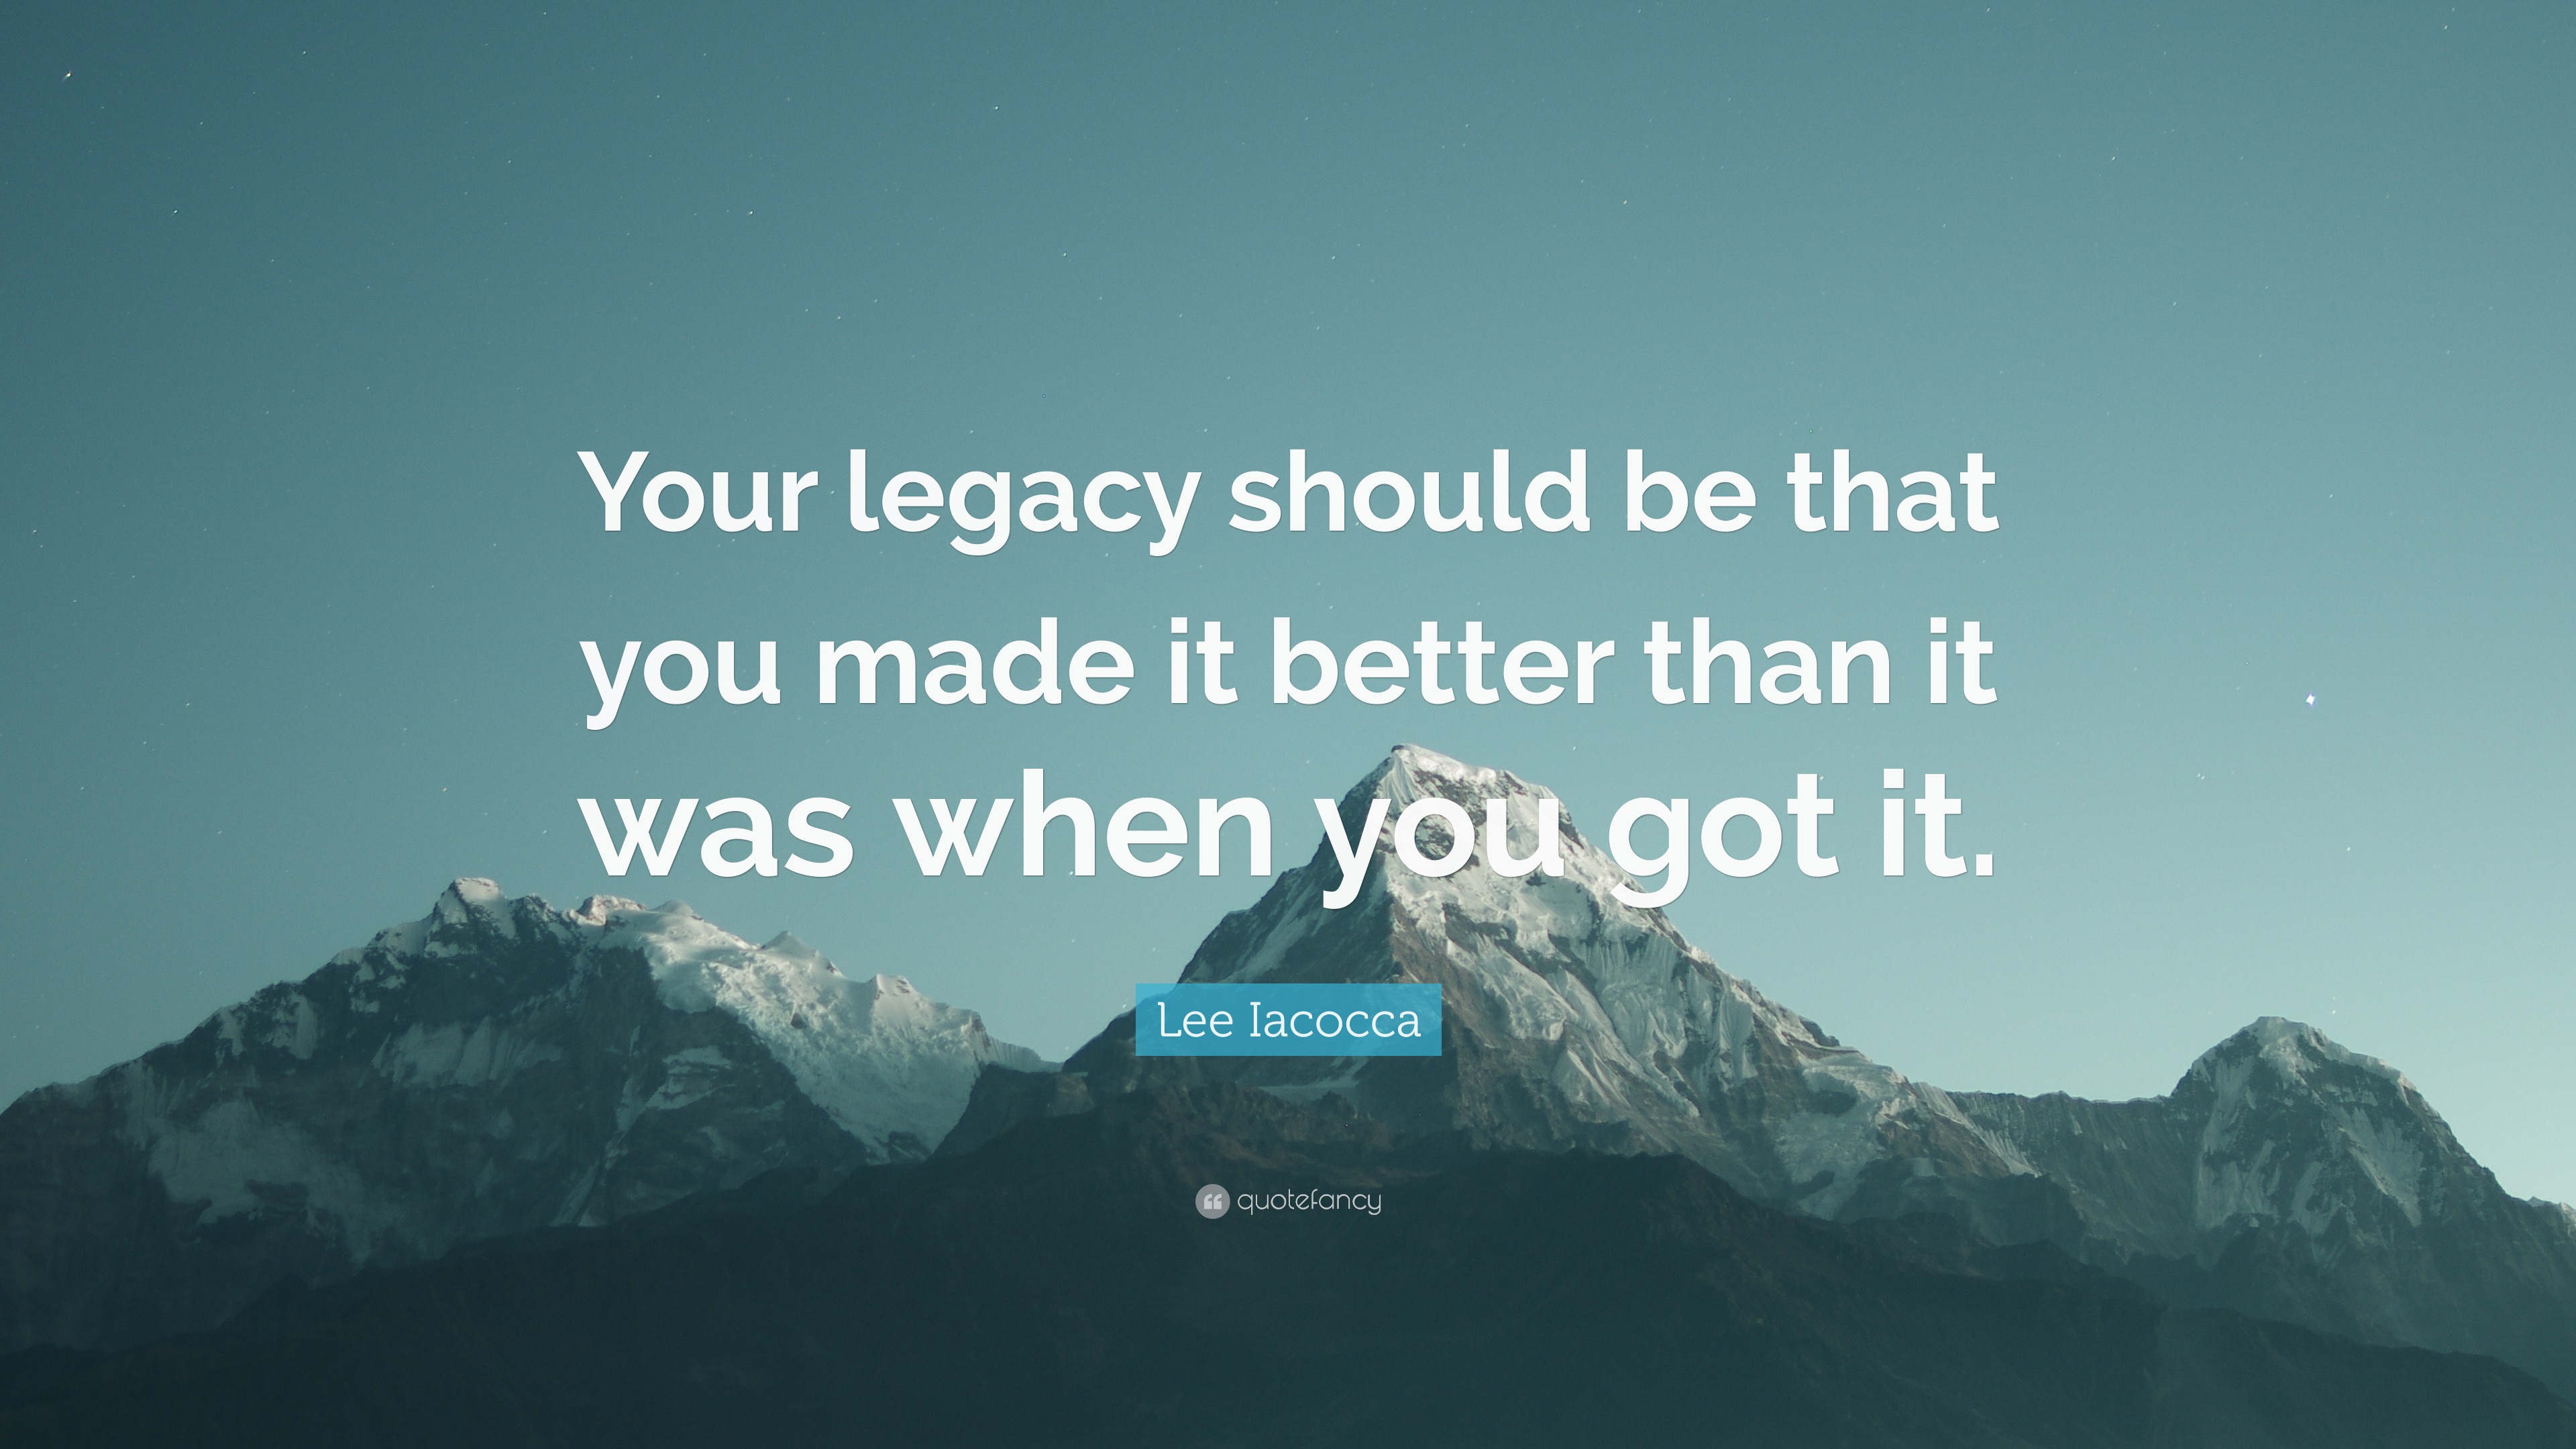 Lee Iacocca Quote: “Your legacy should be that you made it better